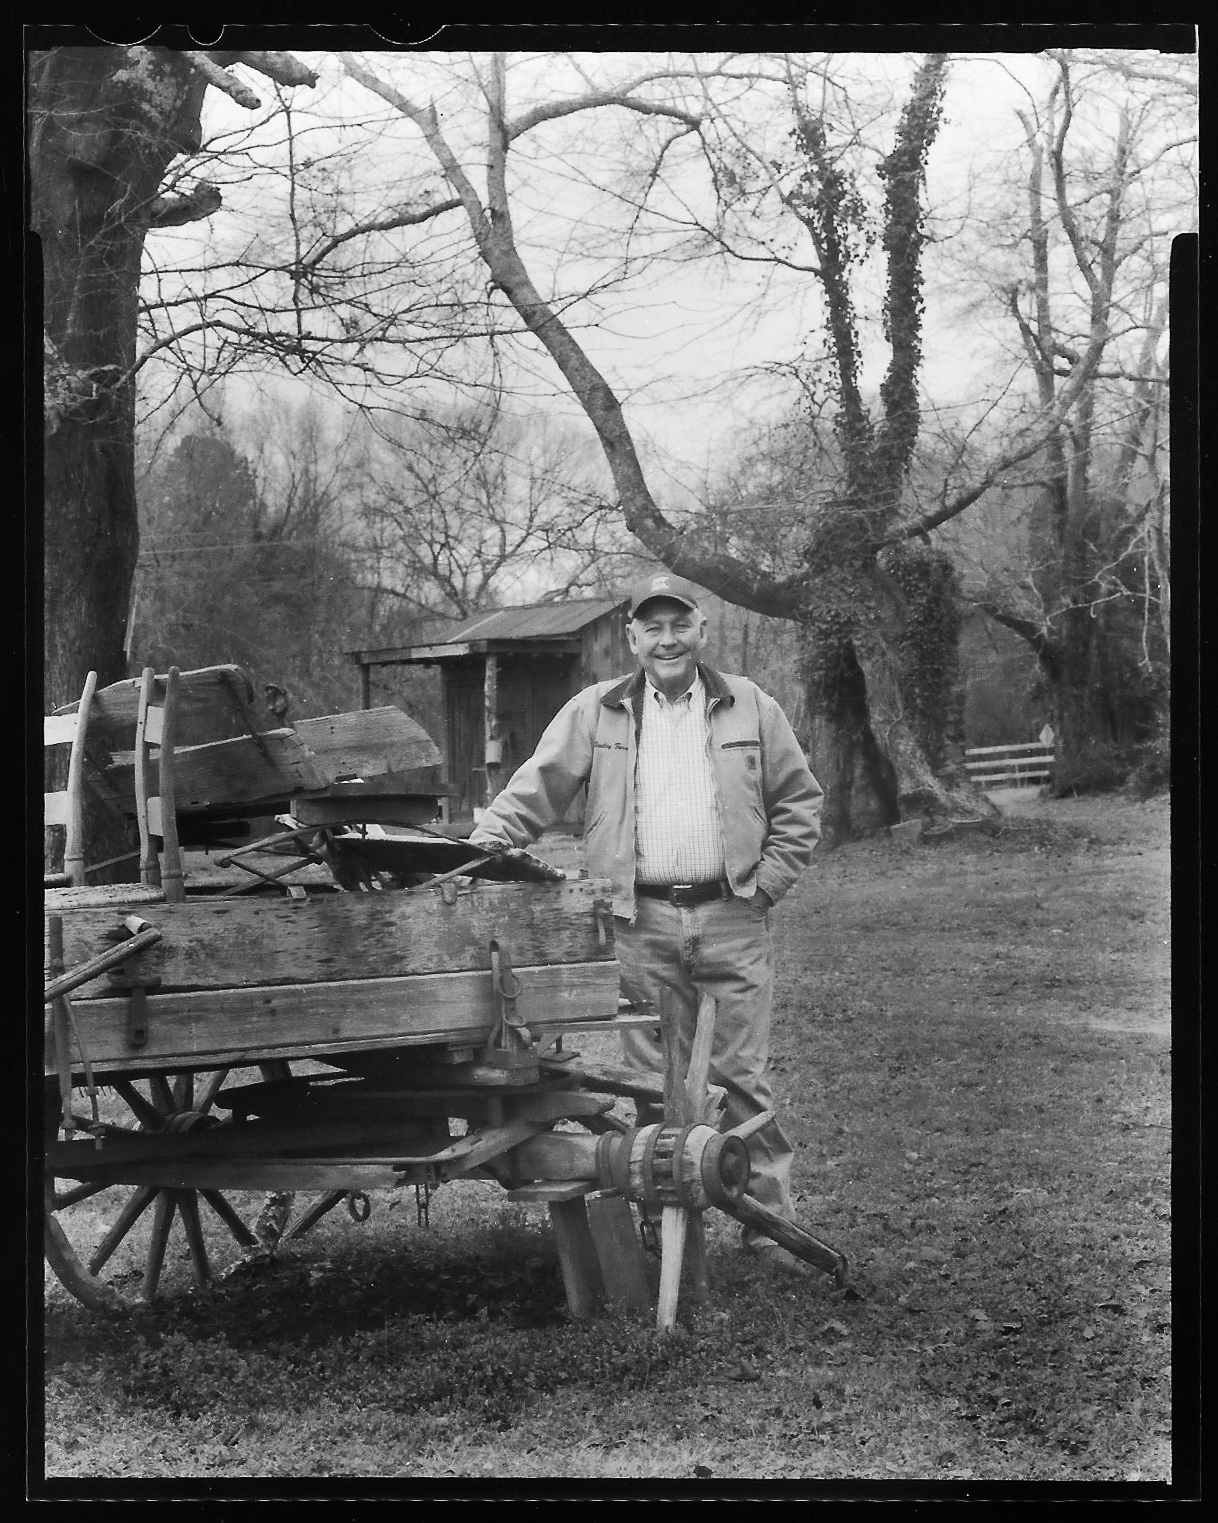 Danny Bentley poses on his land near Thomaston, Georgia, where his great-great-great grandfather first moved in 1824. The property is scattered with old farm equipment — sickle mowers, this wagon missing one wheel that is believed to have been built around 1880, and an outhouse that might be just as old. Photo: Eric Dusenbery.